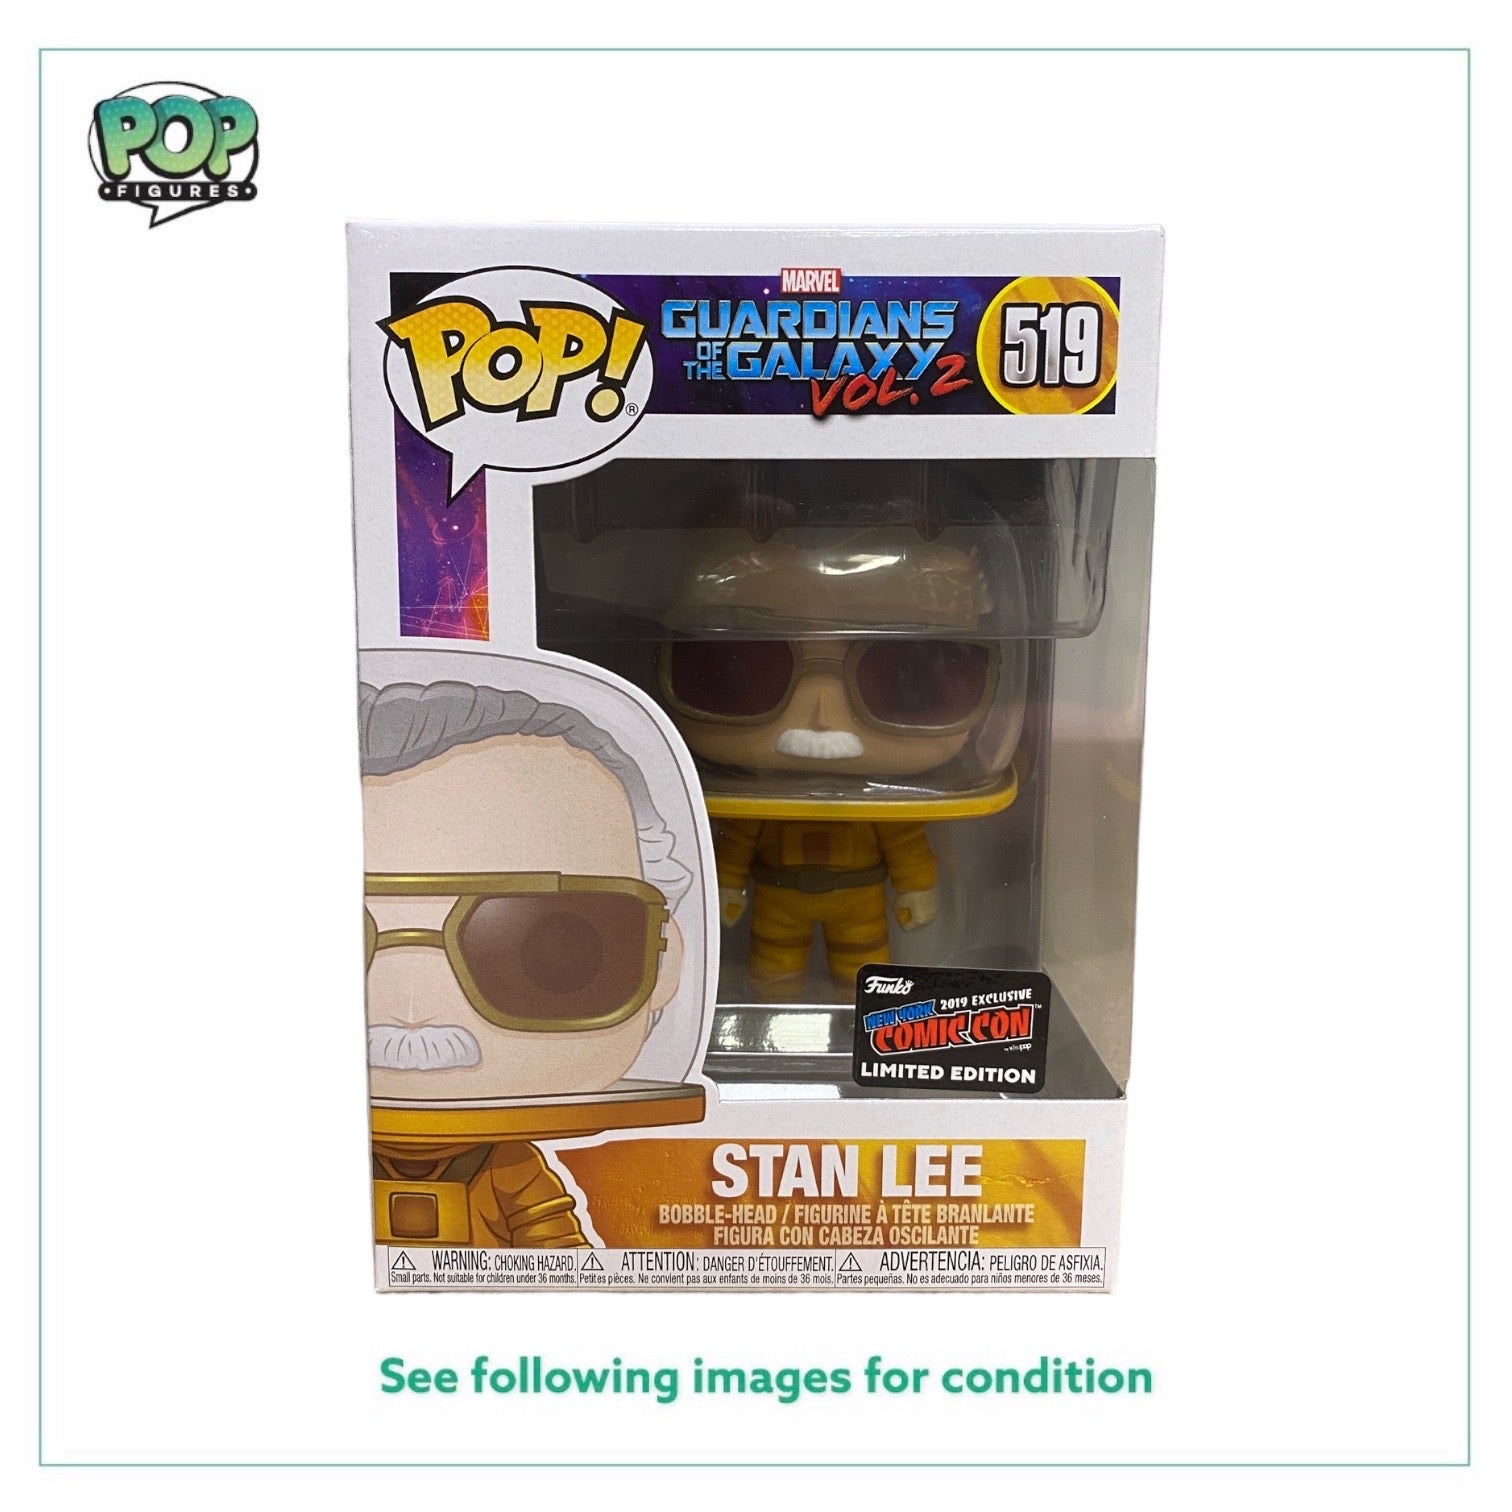 Stan Lee #519 (Watcher Informant) Funko Pop! - Guardians of the Galaxy Vol.2 - NYCC 2019 Official Convention Exclusive - Condition 9.5/10